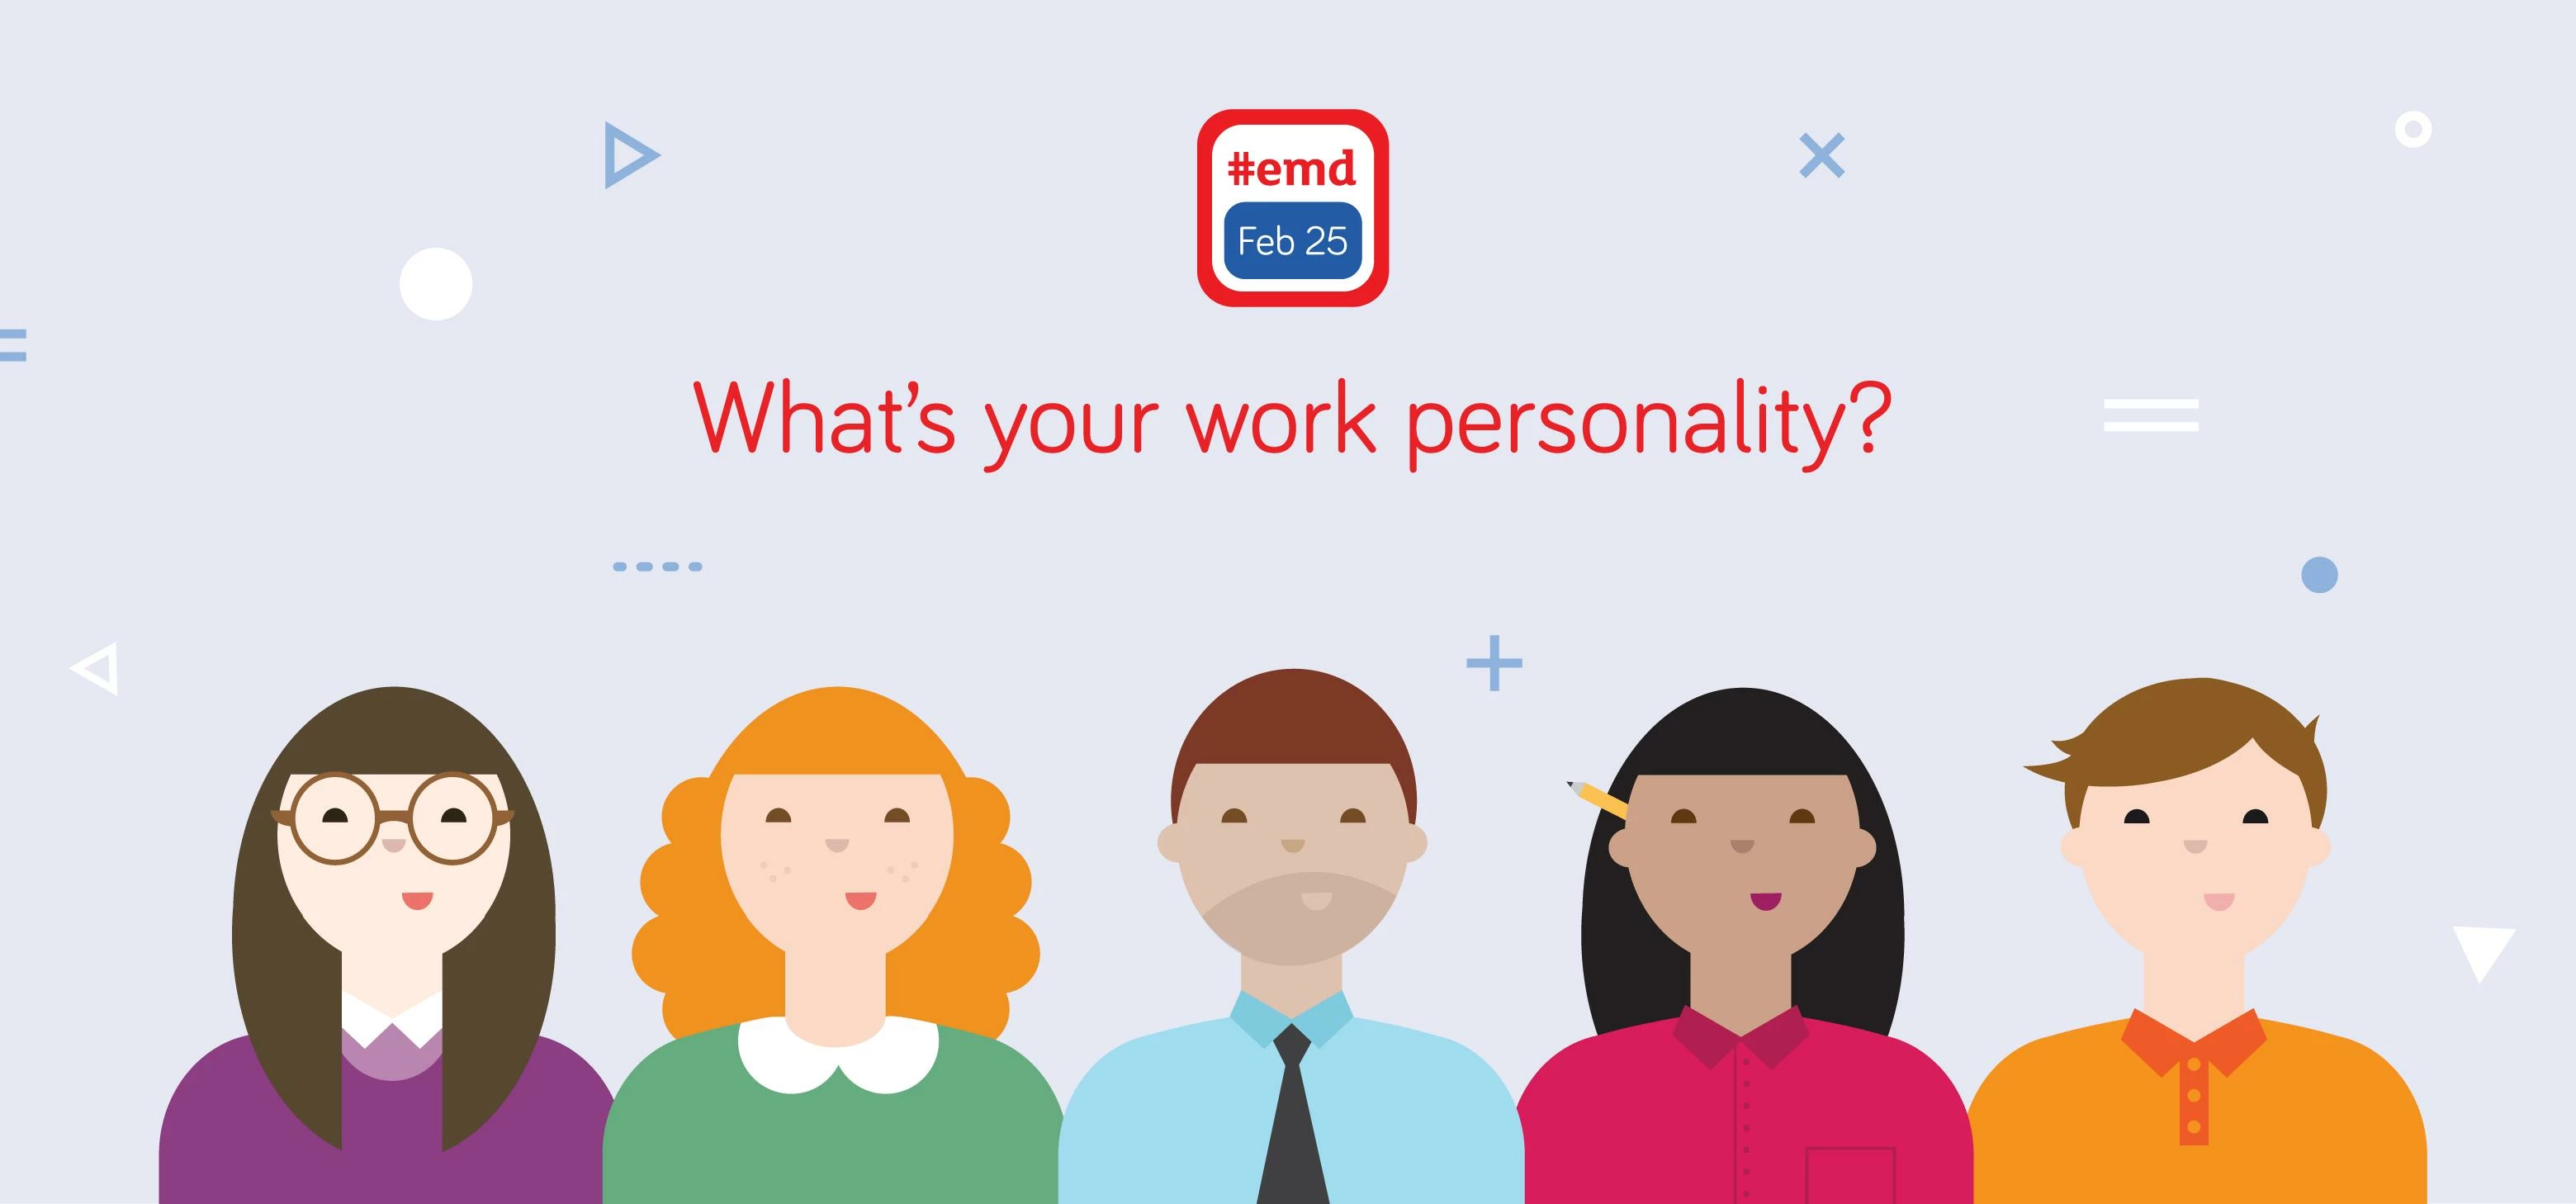 Take the #EMD quiz and find out your work personality